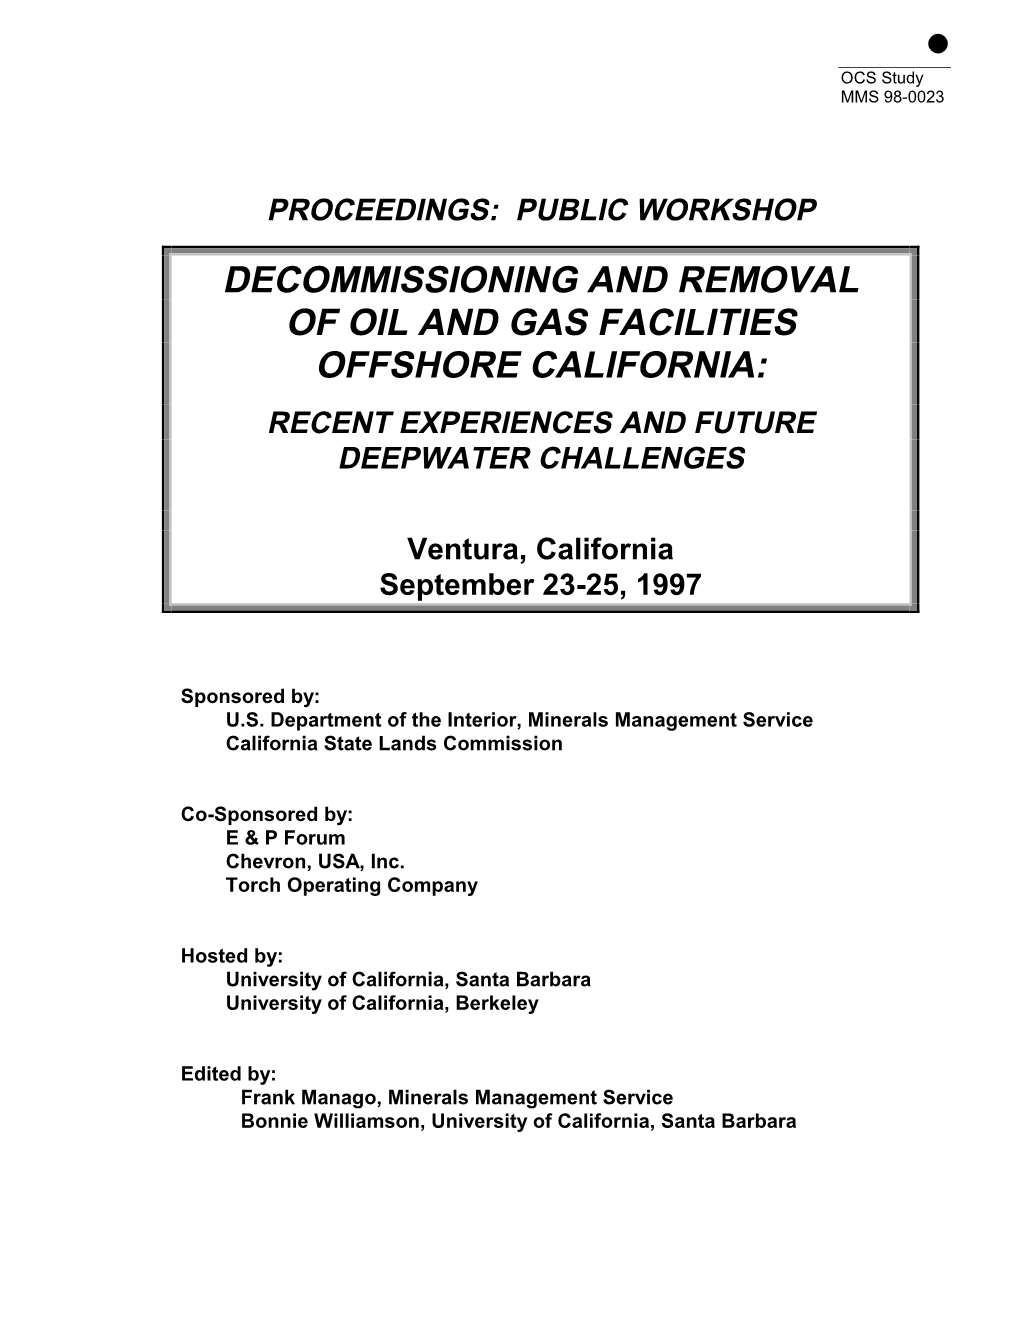 Decommissioning and Removal of Oil and Gas Facilities Offshore California: Recent Experiences and Future Deepwater Challenges